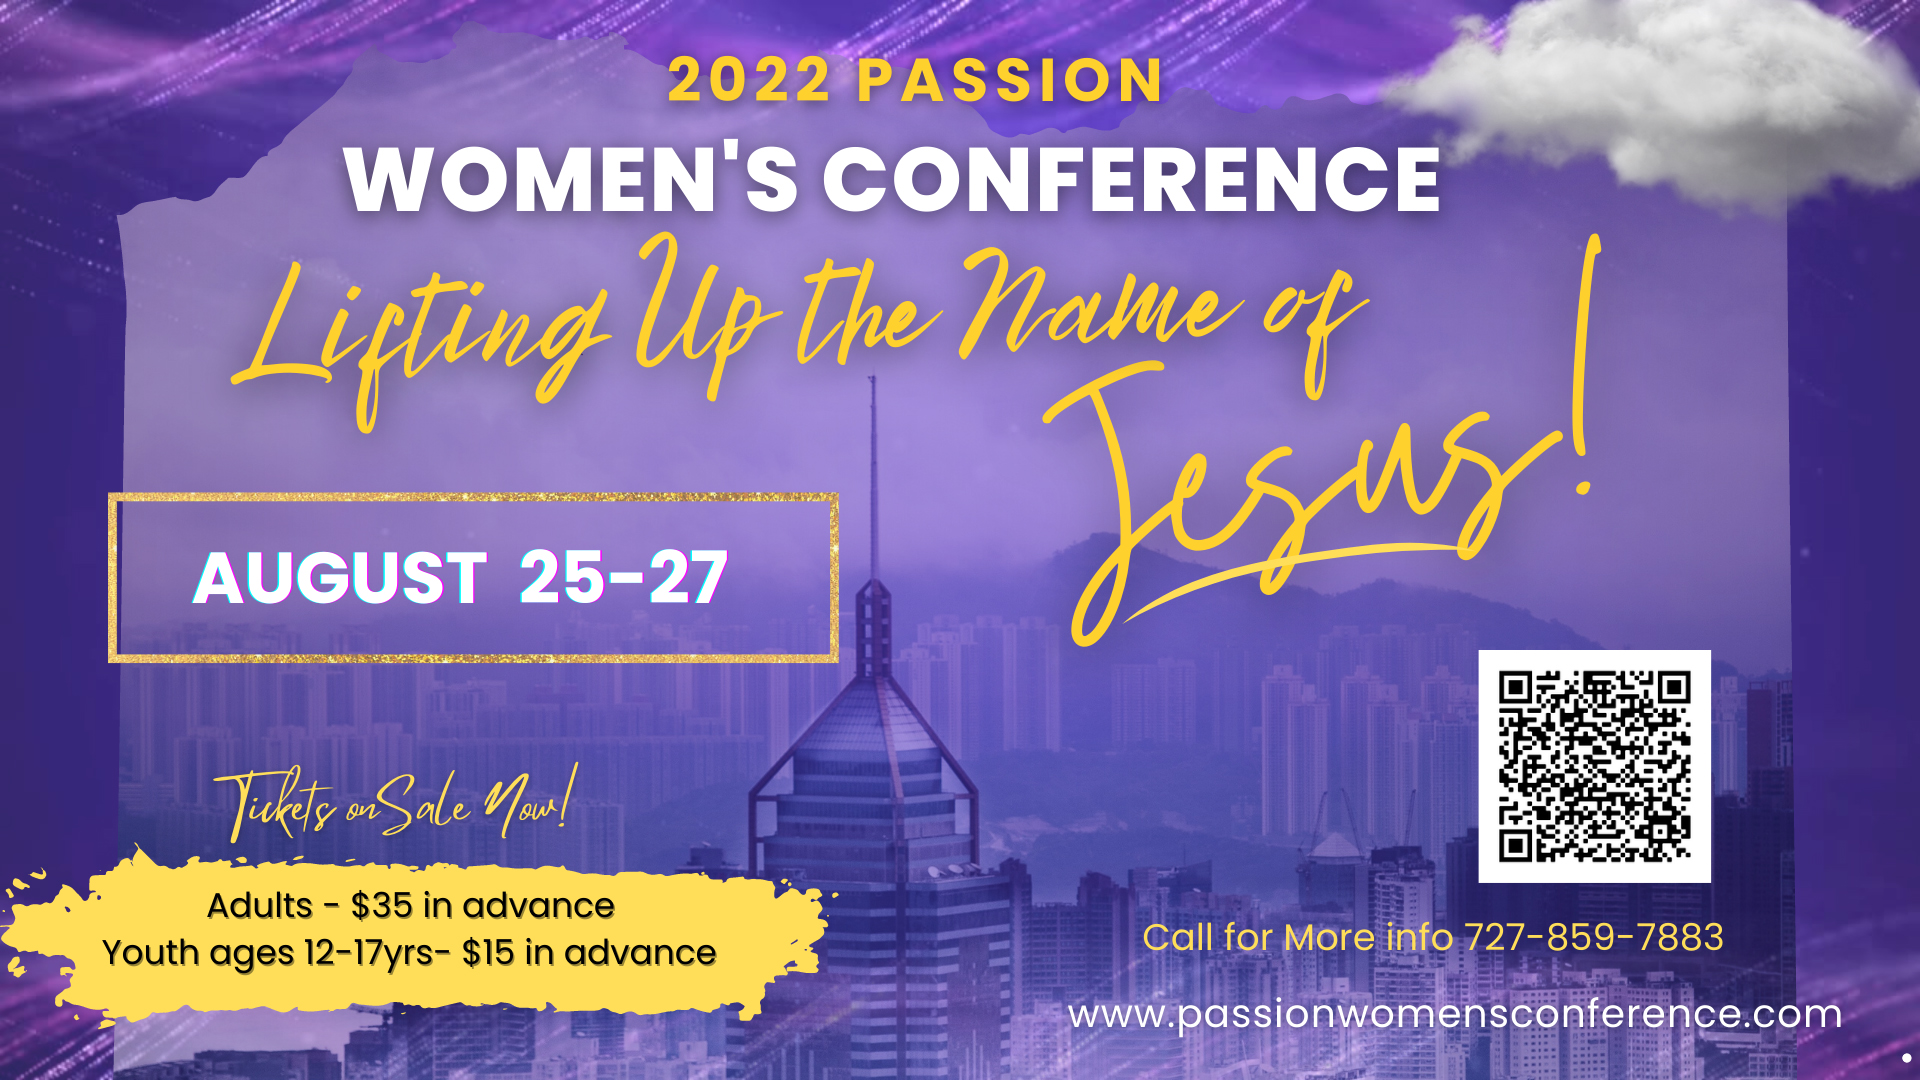 2022 Passion Women’s Conference